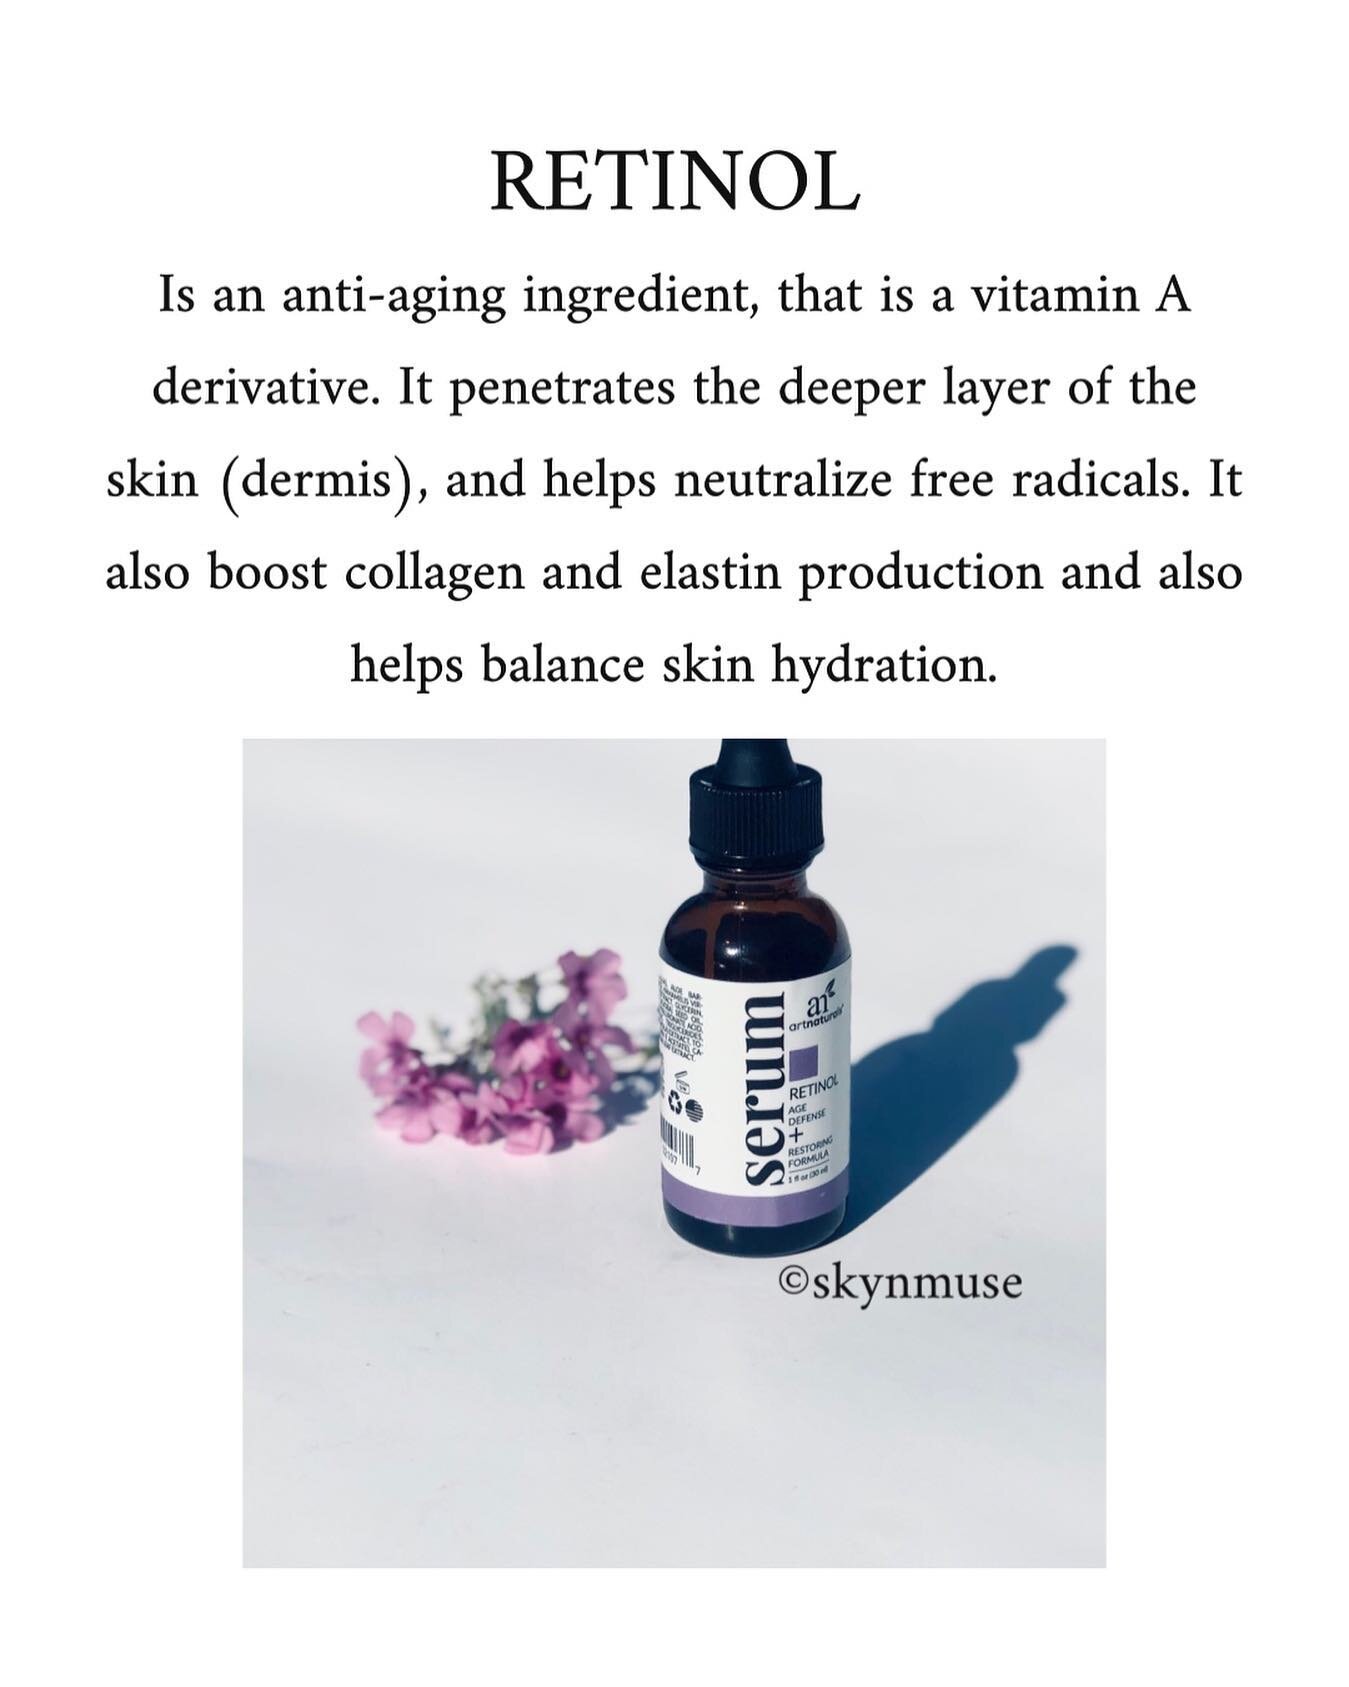 Would you like a dedicated blog post talking all about retinol? Let us know in the comment ❤️

#retinol #retinolserum #retinolskincare #skincare #naturalskincare #skynmuse